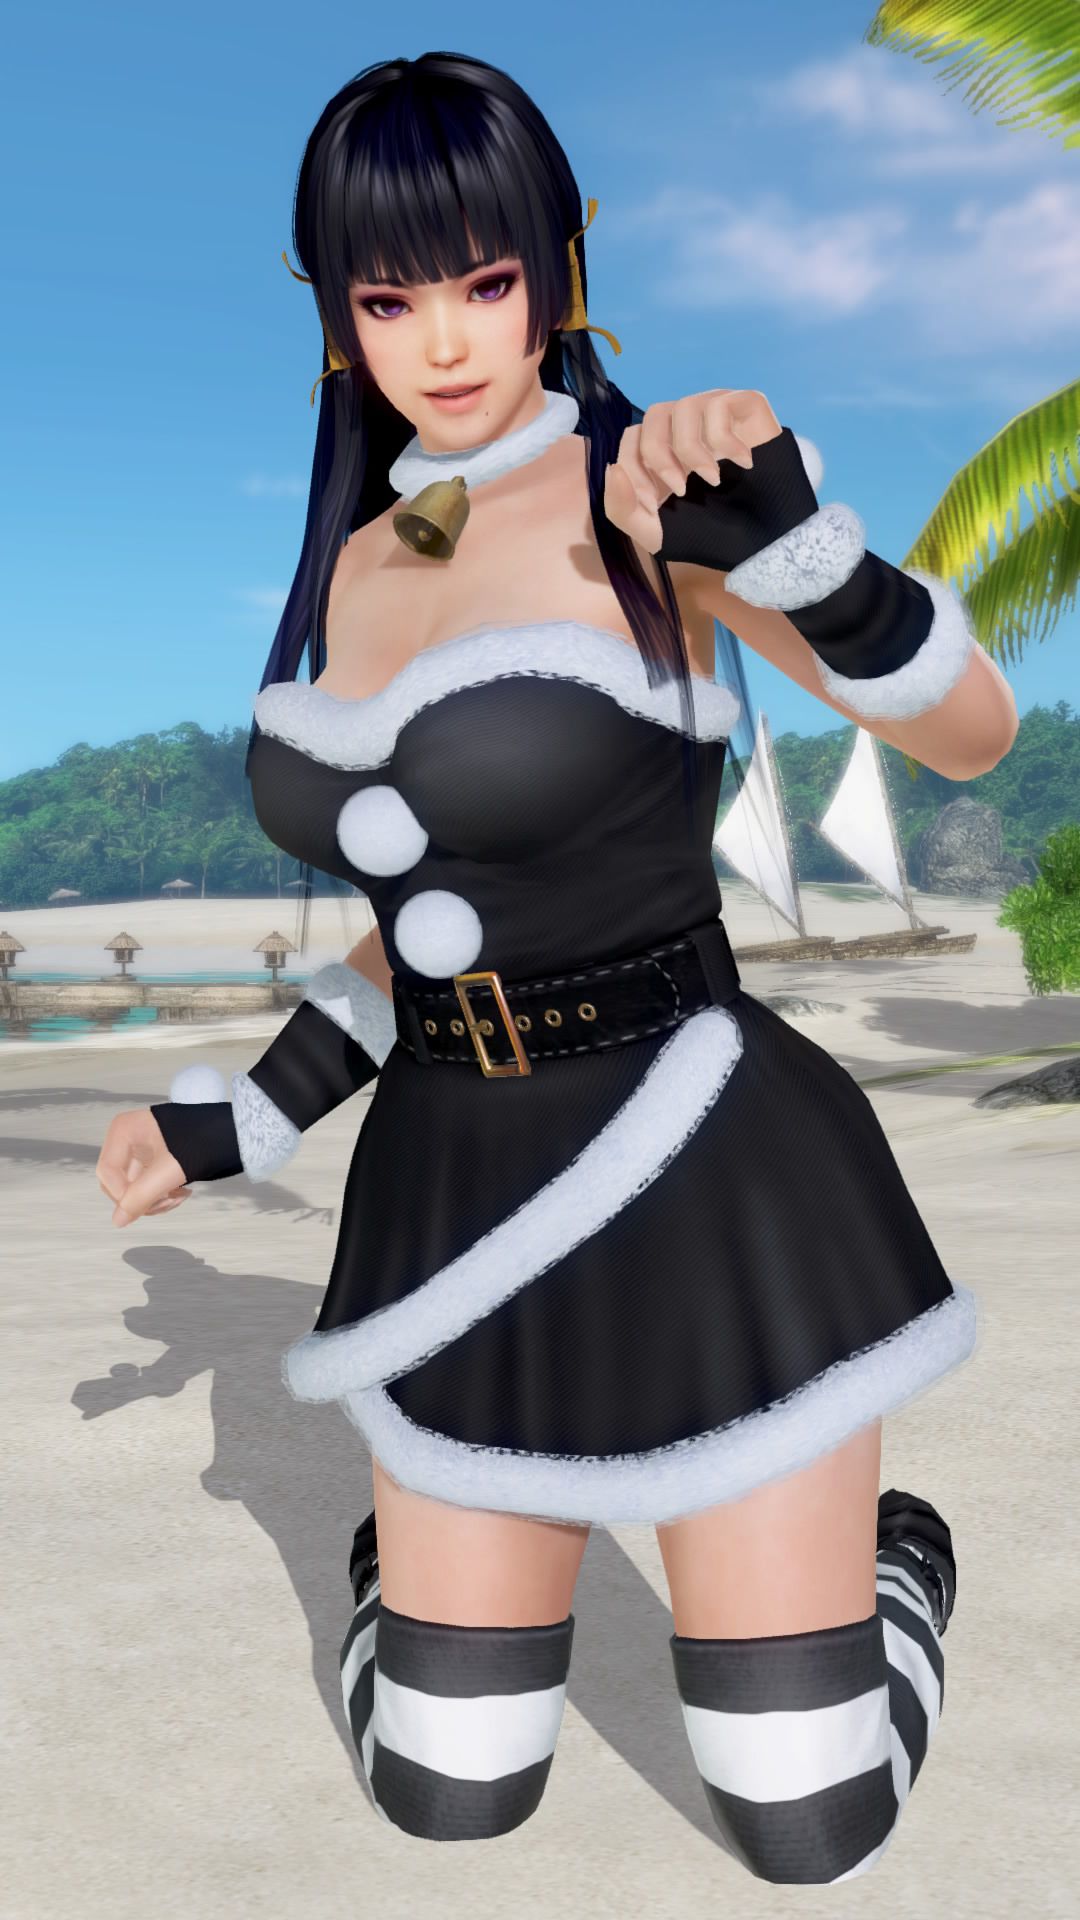 Merry Xmas from DOAX3 South Island! Photo session with new swimsuit Santa 37